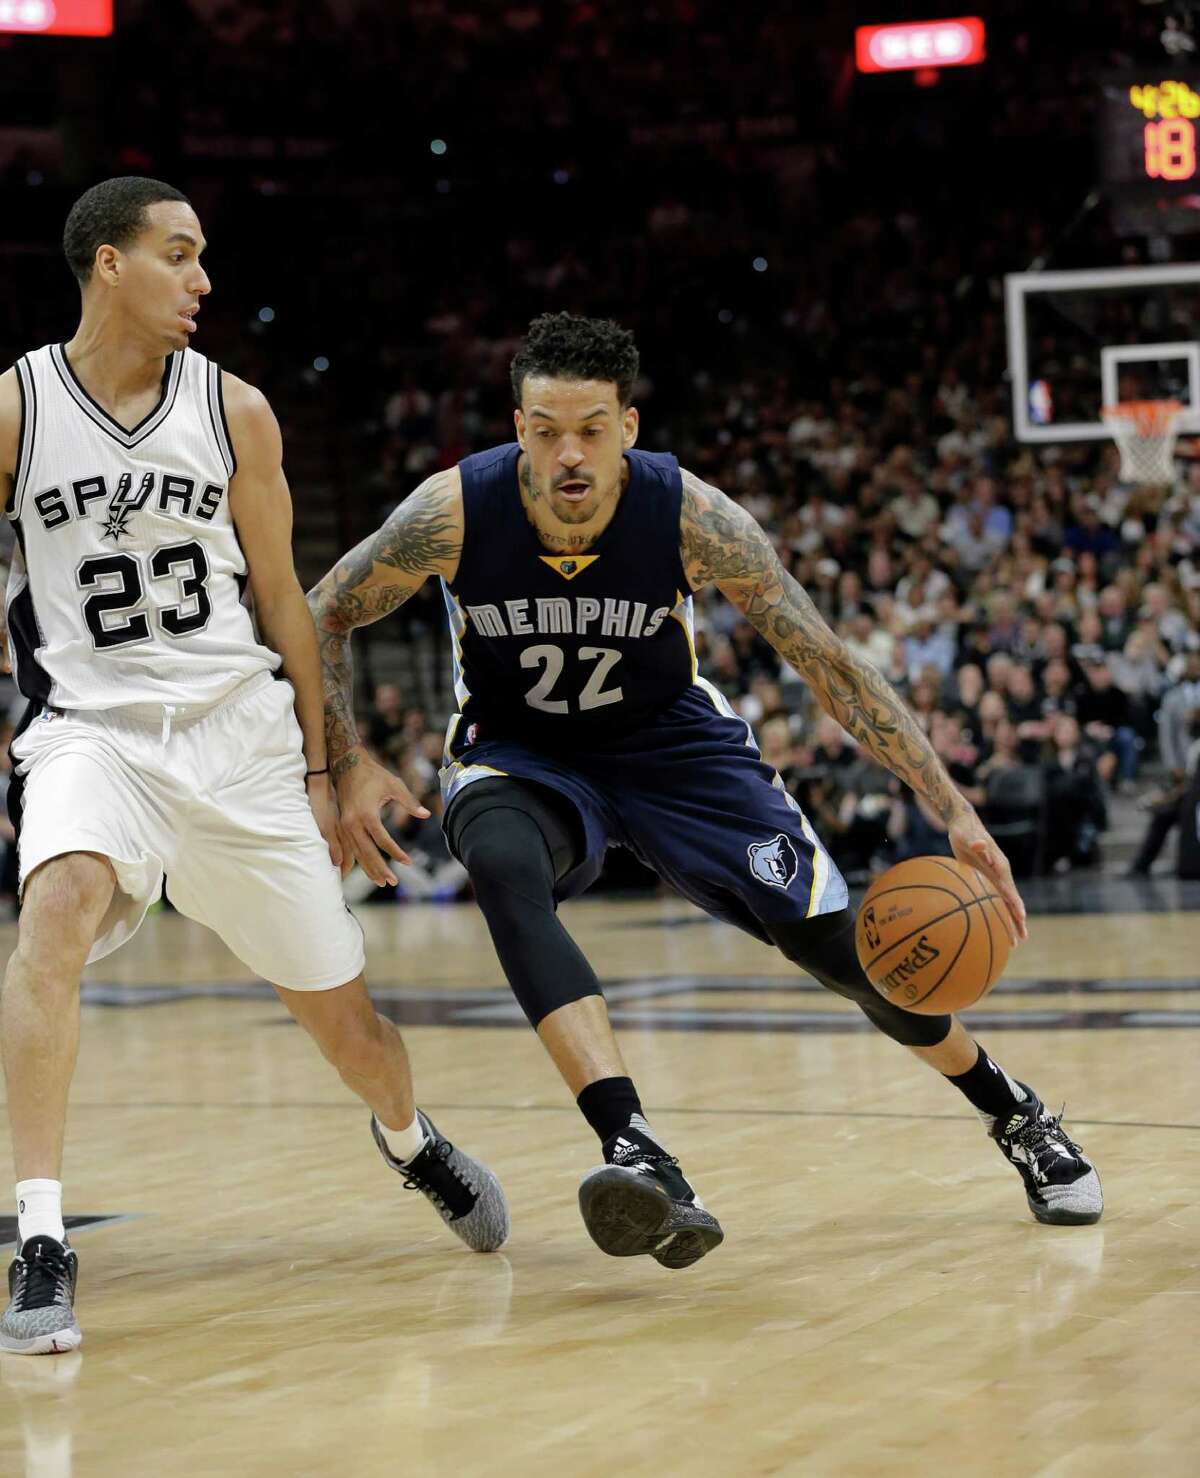 Memphis Grizzlies forward Matt Barnes (22) drives around San Antonio Spurs guard Kevin Martin (23) during the first half in Game 2 of a first-round NBA basketball playoff series, Tuesday, April 19, 2016, in San Antonio.